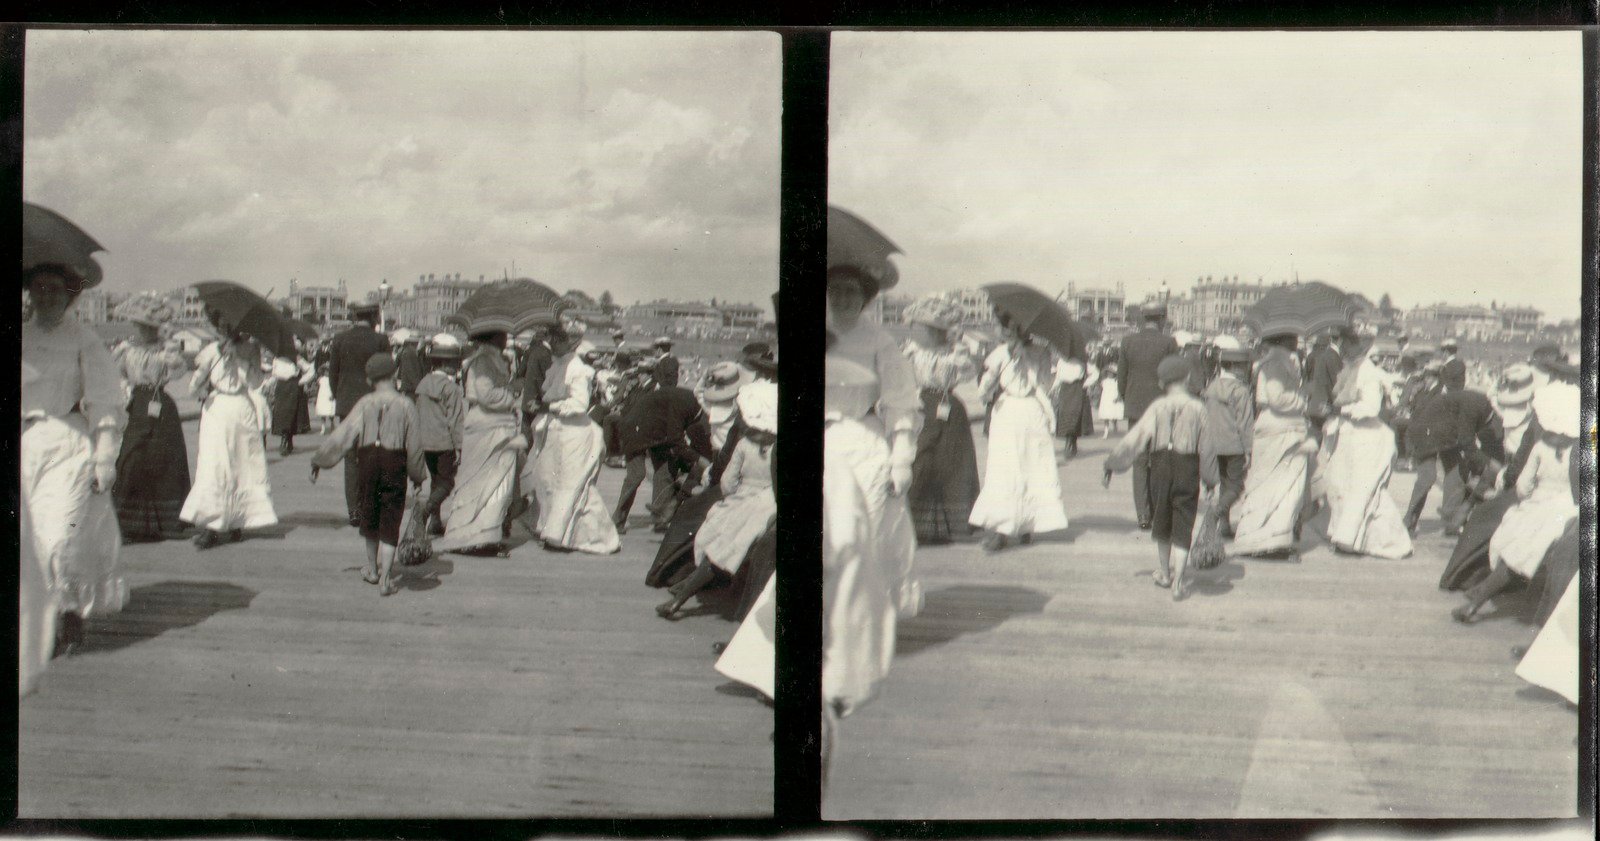 Black and white photo of crowds in 19th century dress wandering along the St Kilda foreshore